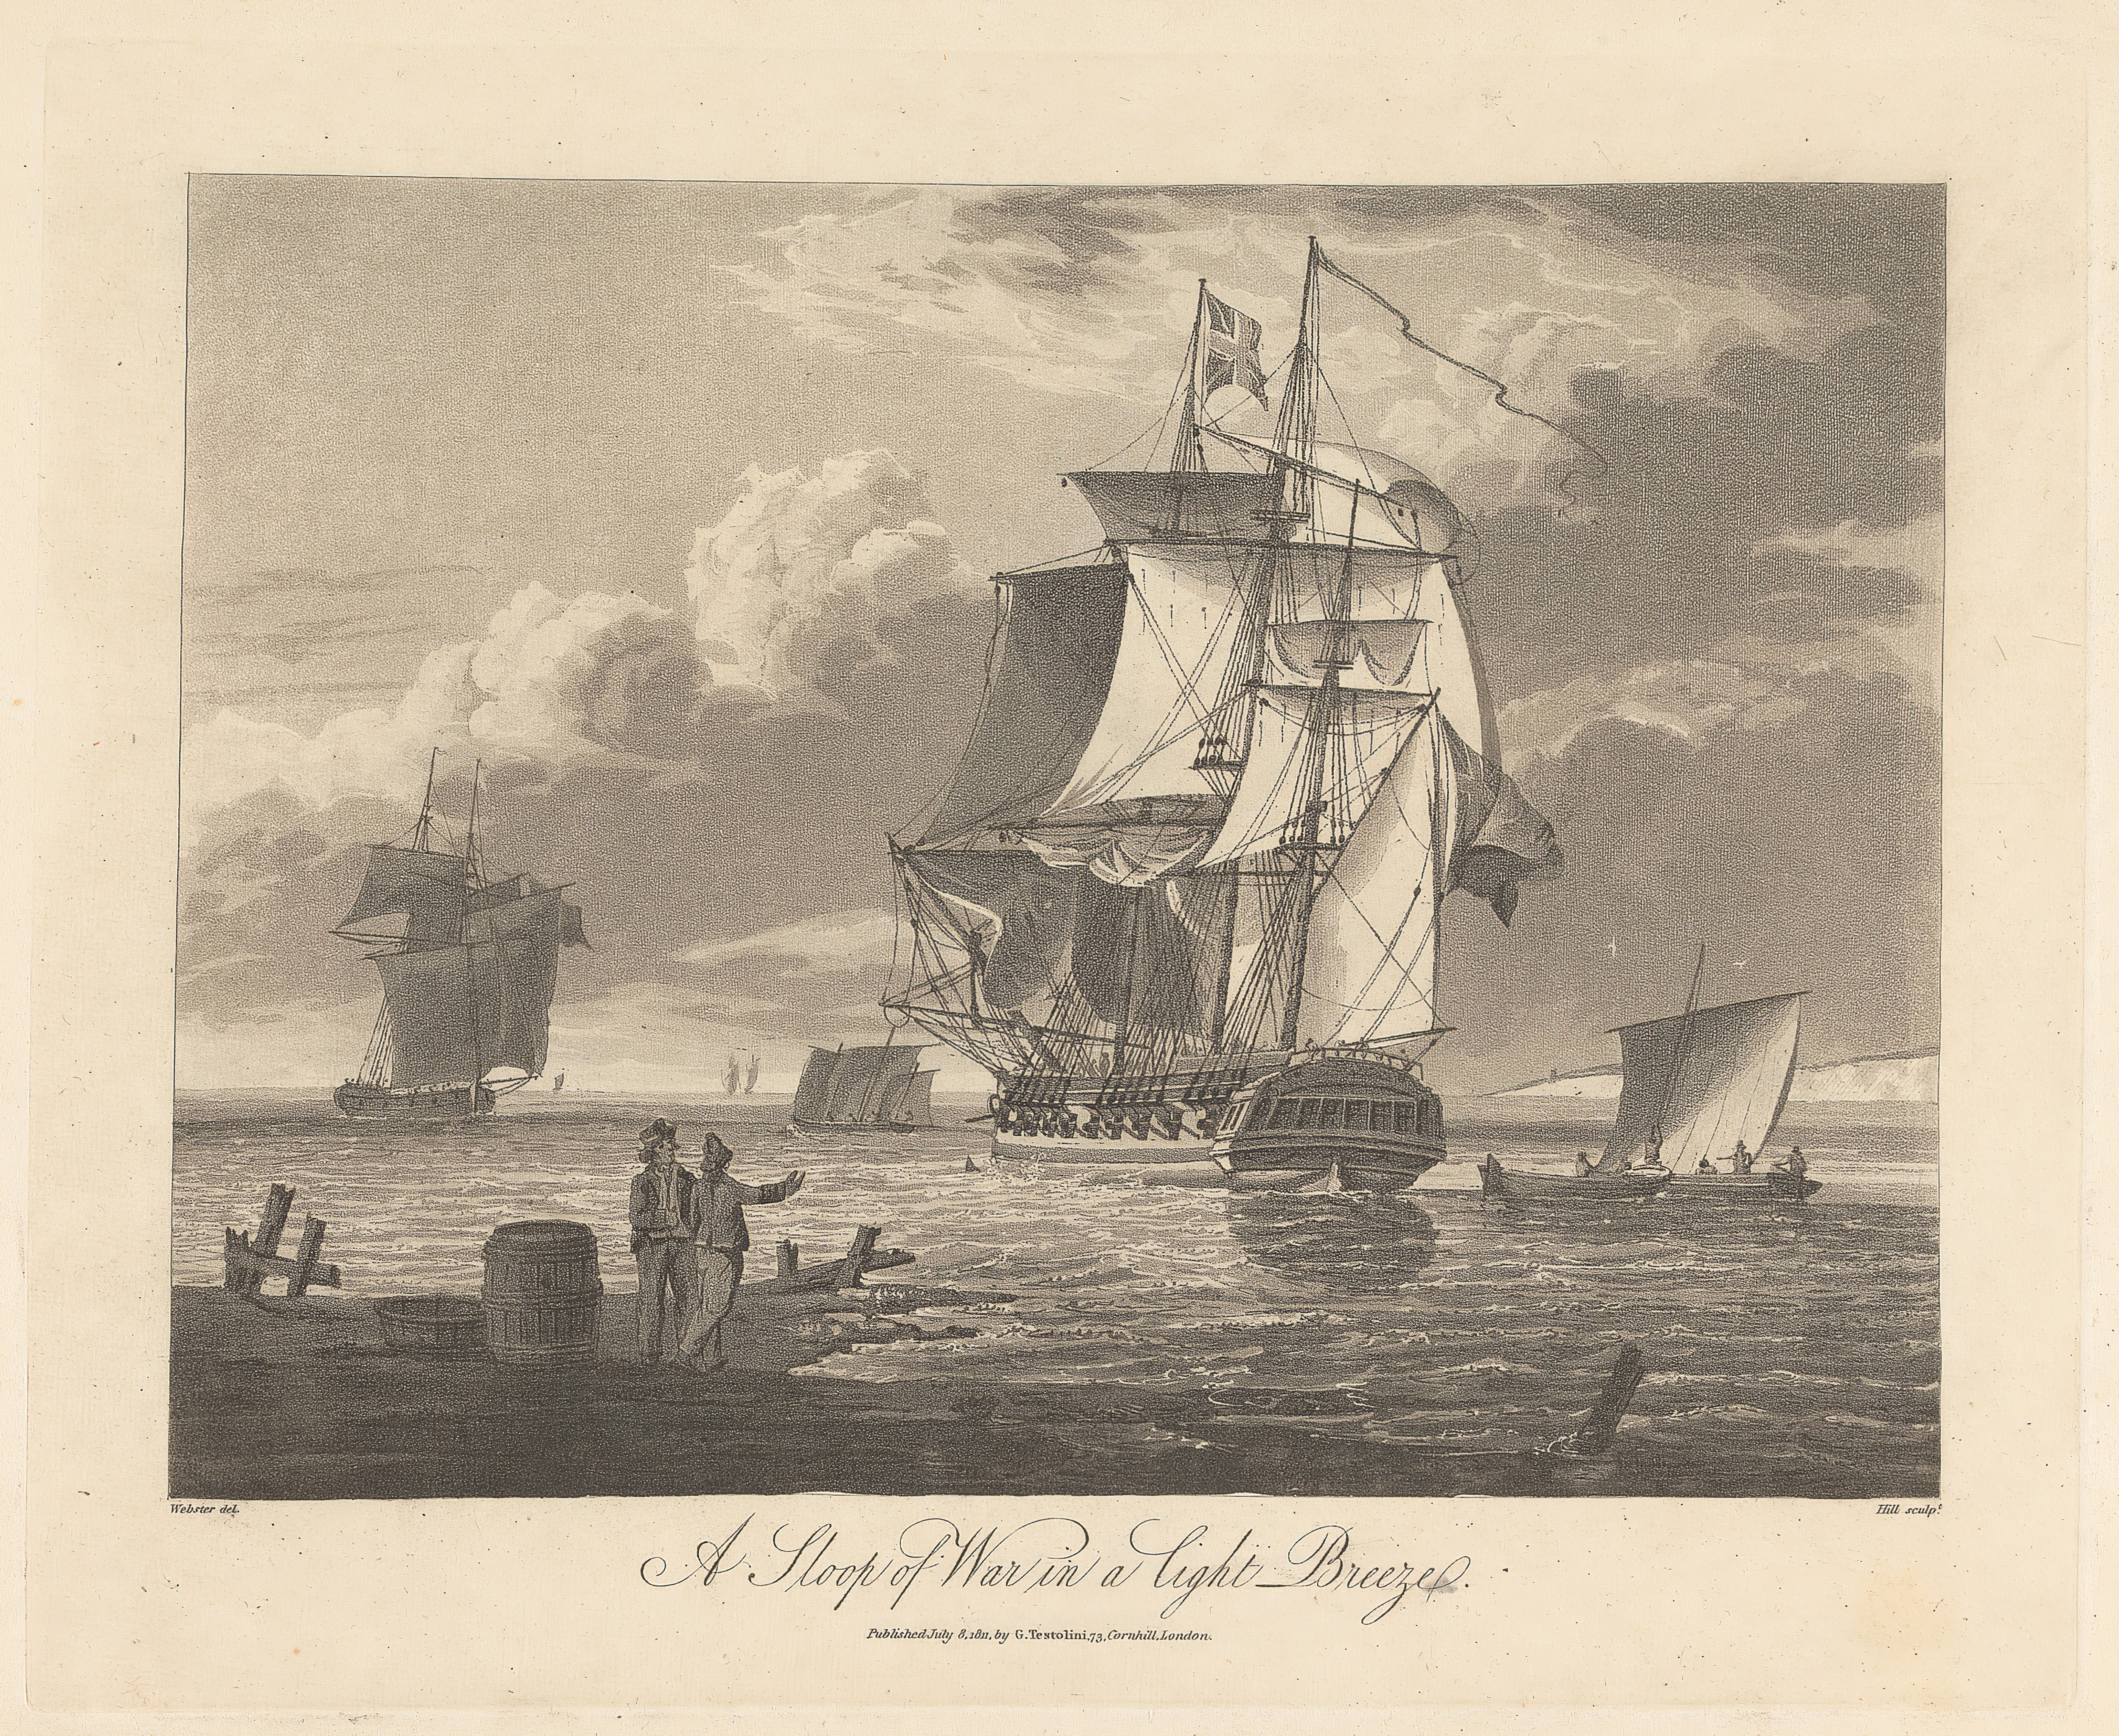 A Sloop of War in a Light Breeze, J. Hill, active 19th century, after George Webster, 1797–1864, British, Published by Gaetano Testolini, active 1760–1811, James John Hill, 1811–1882, British, 1811, Aquatint on moderately thick, moderately textured,